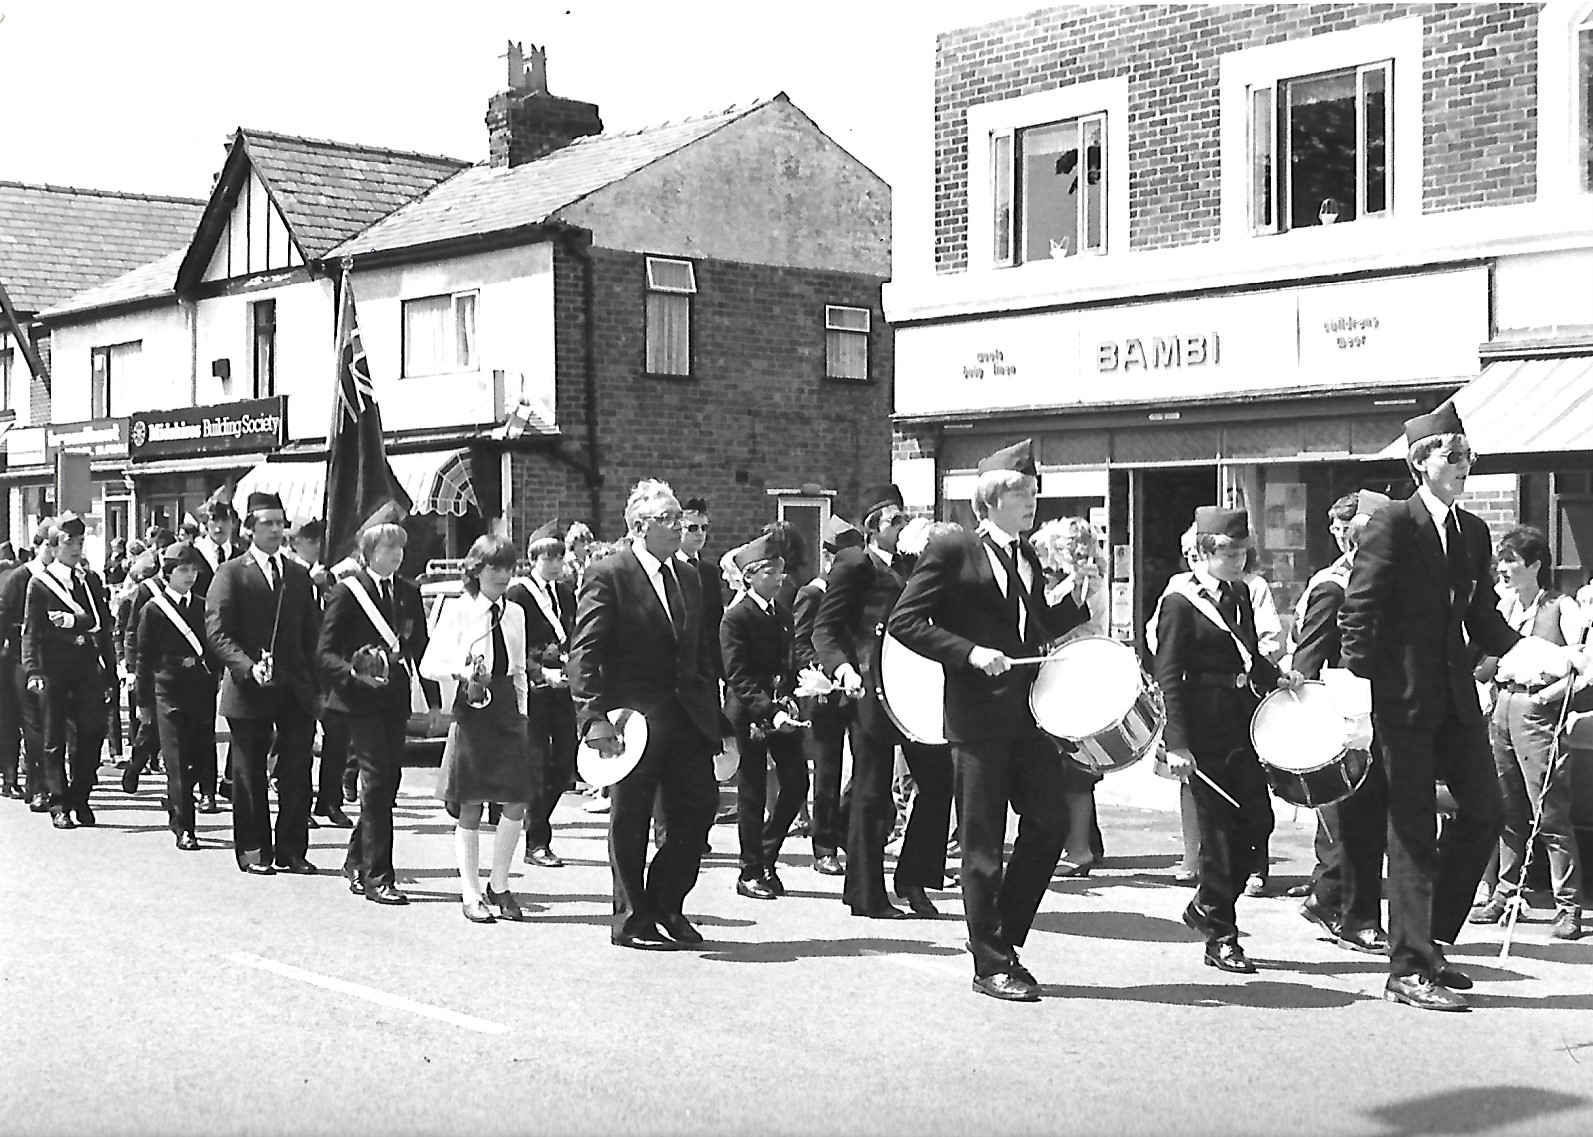 A Boys Brigade march through Ainsdale, as part of the Ainsdale Show, in July 1983